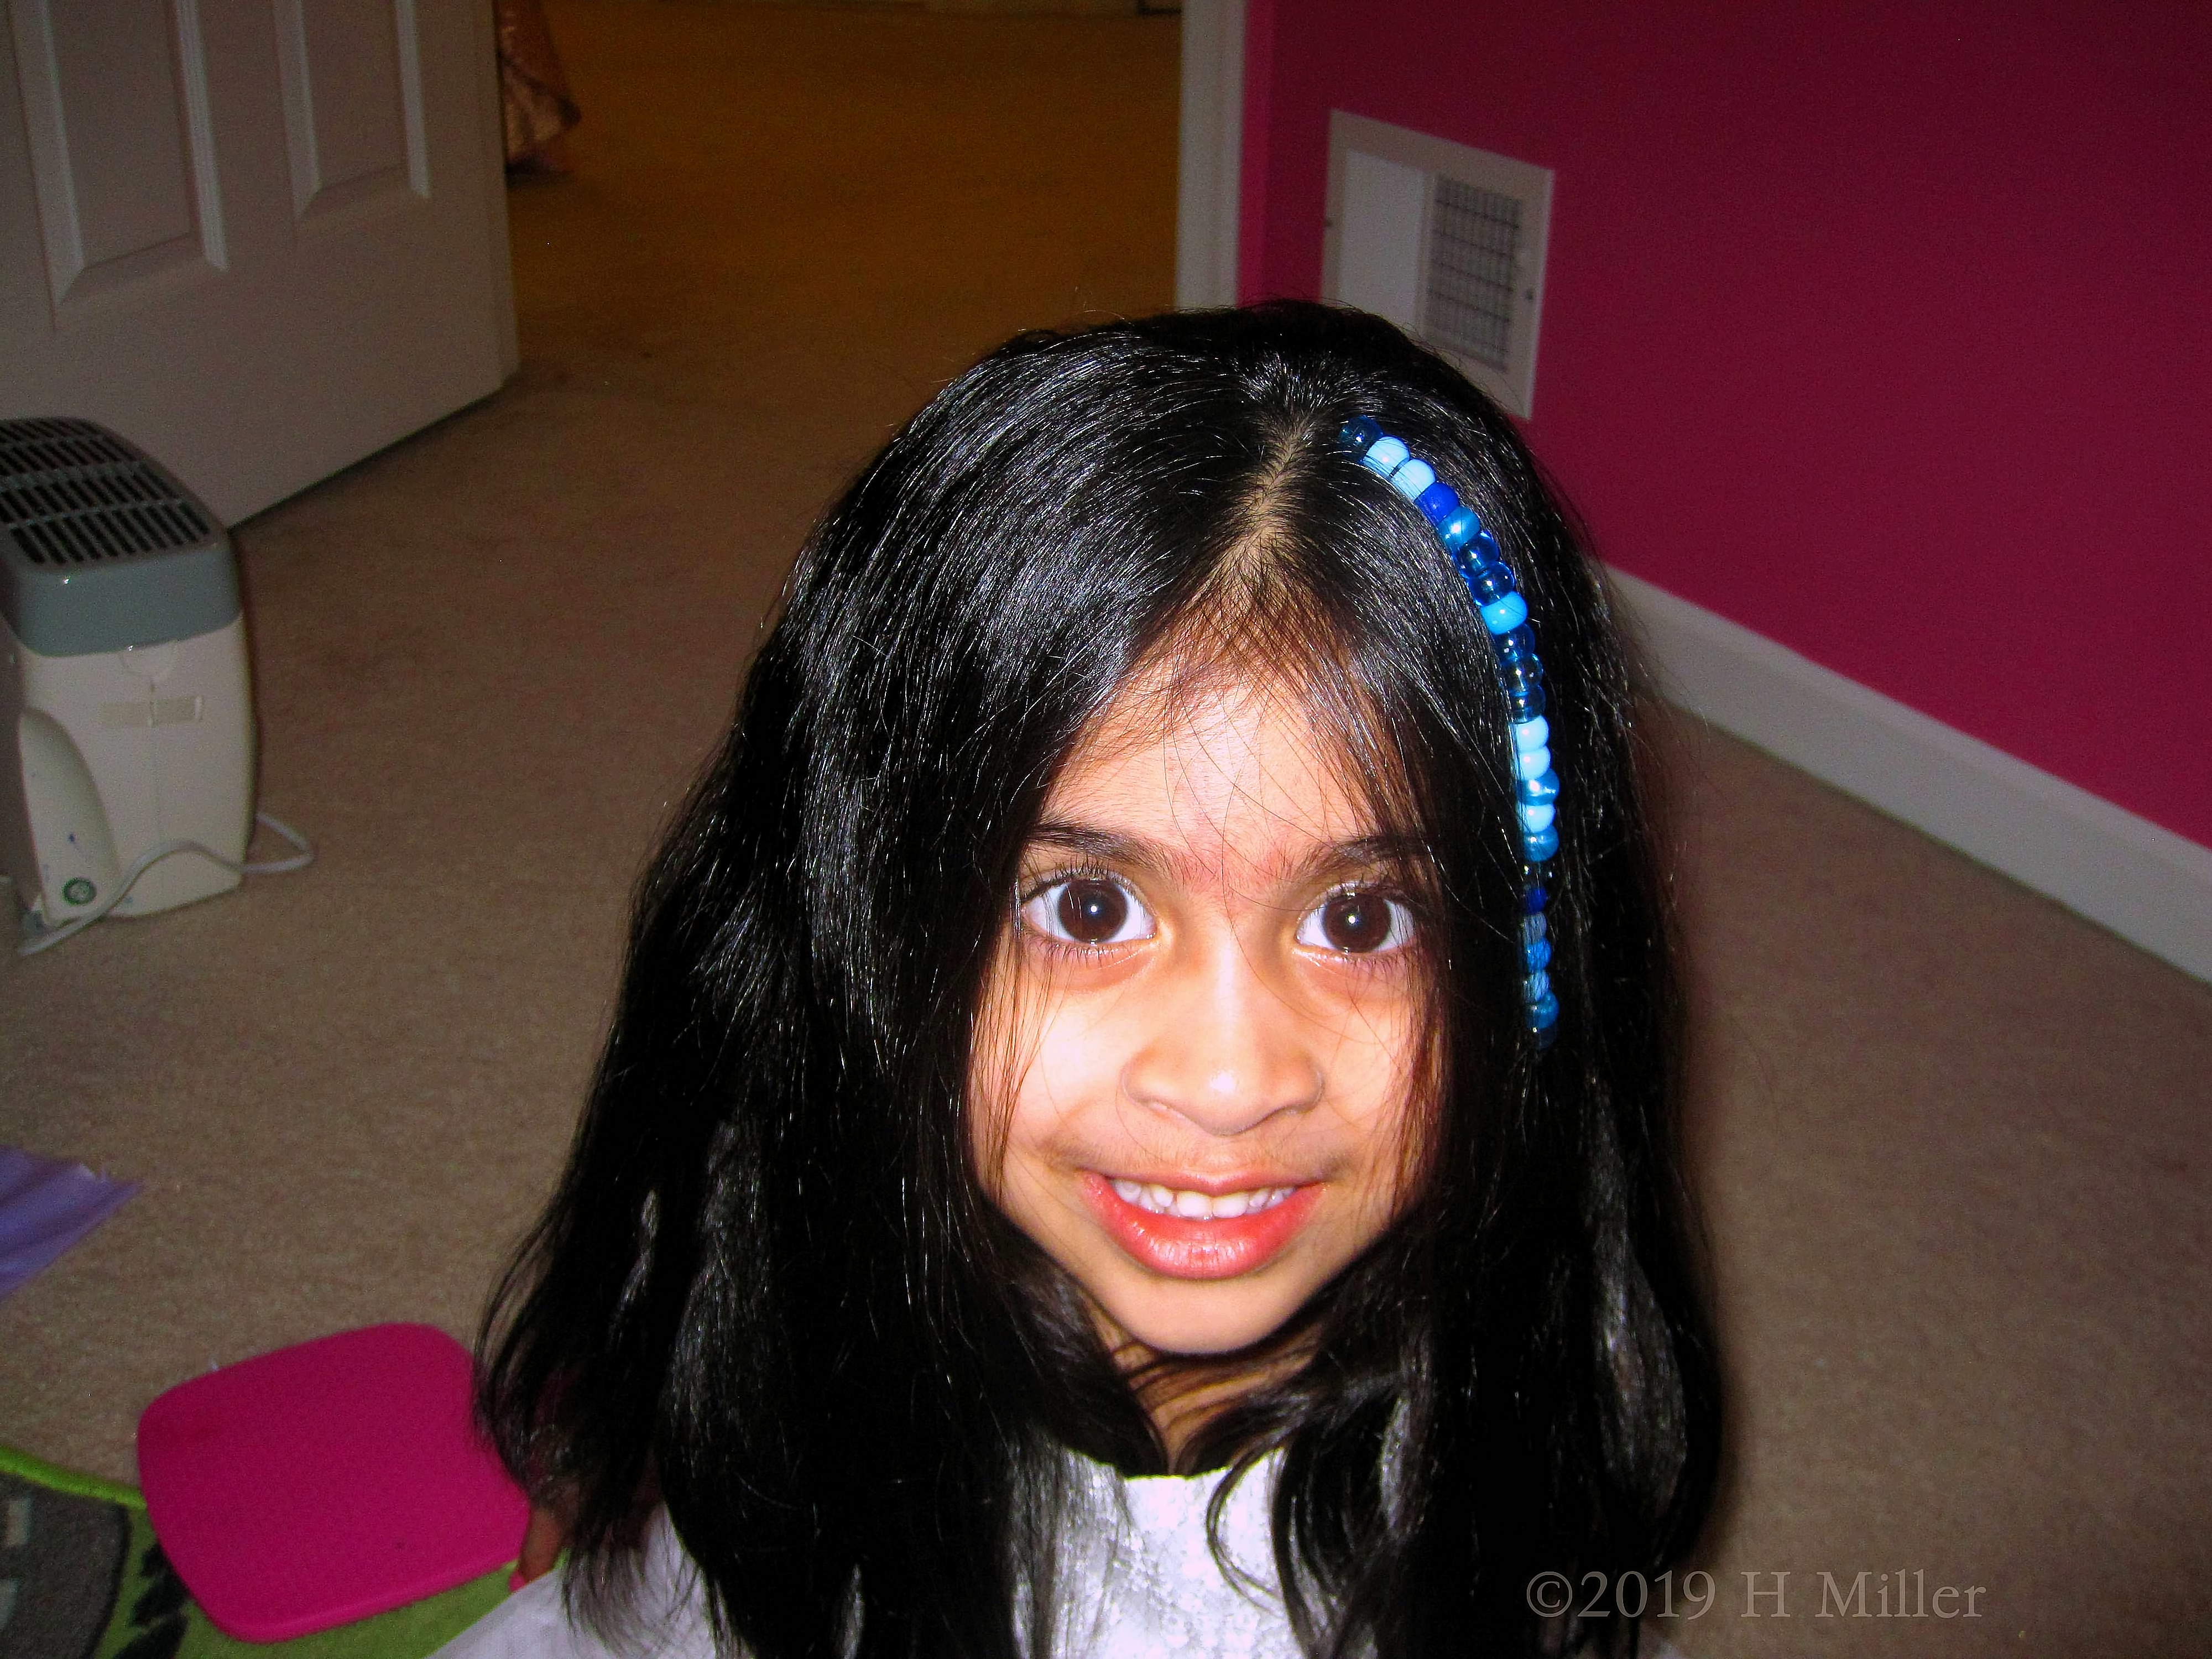 Amazing Kids Hairstyle! Her Hair Looks Perfect With The Cute Beads 